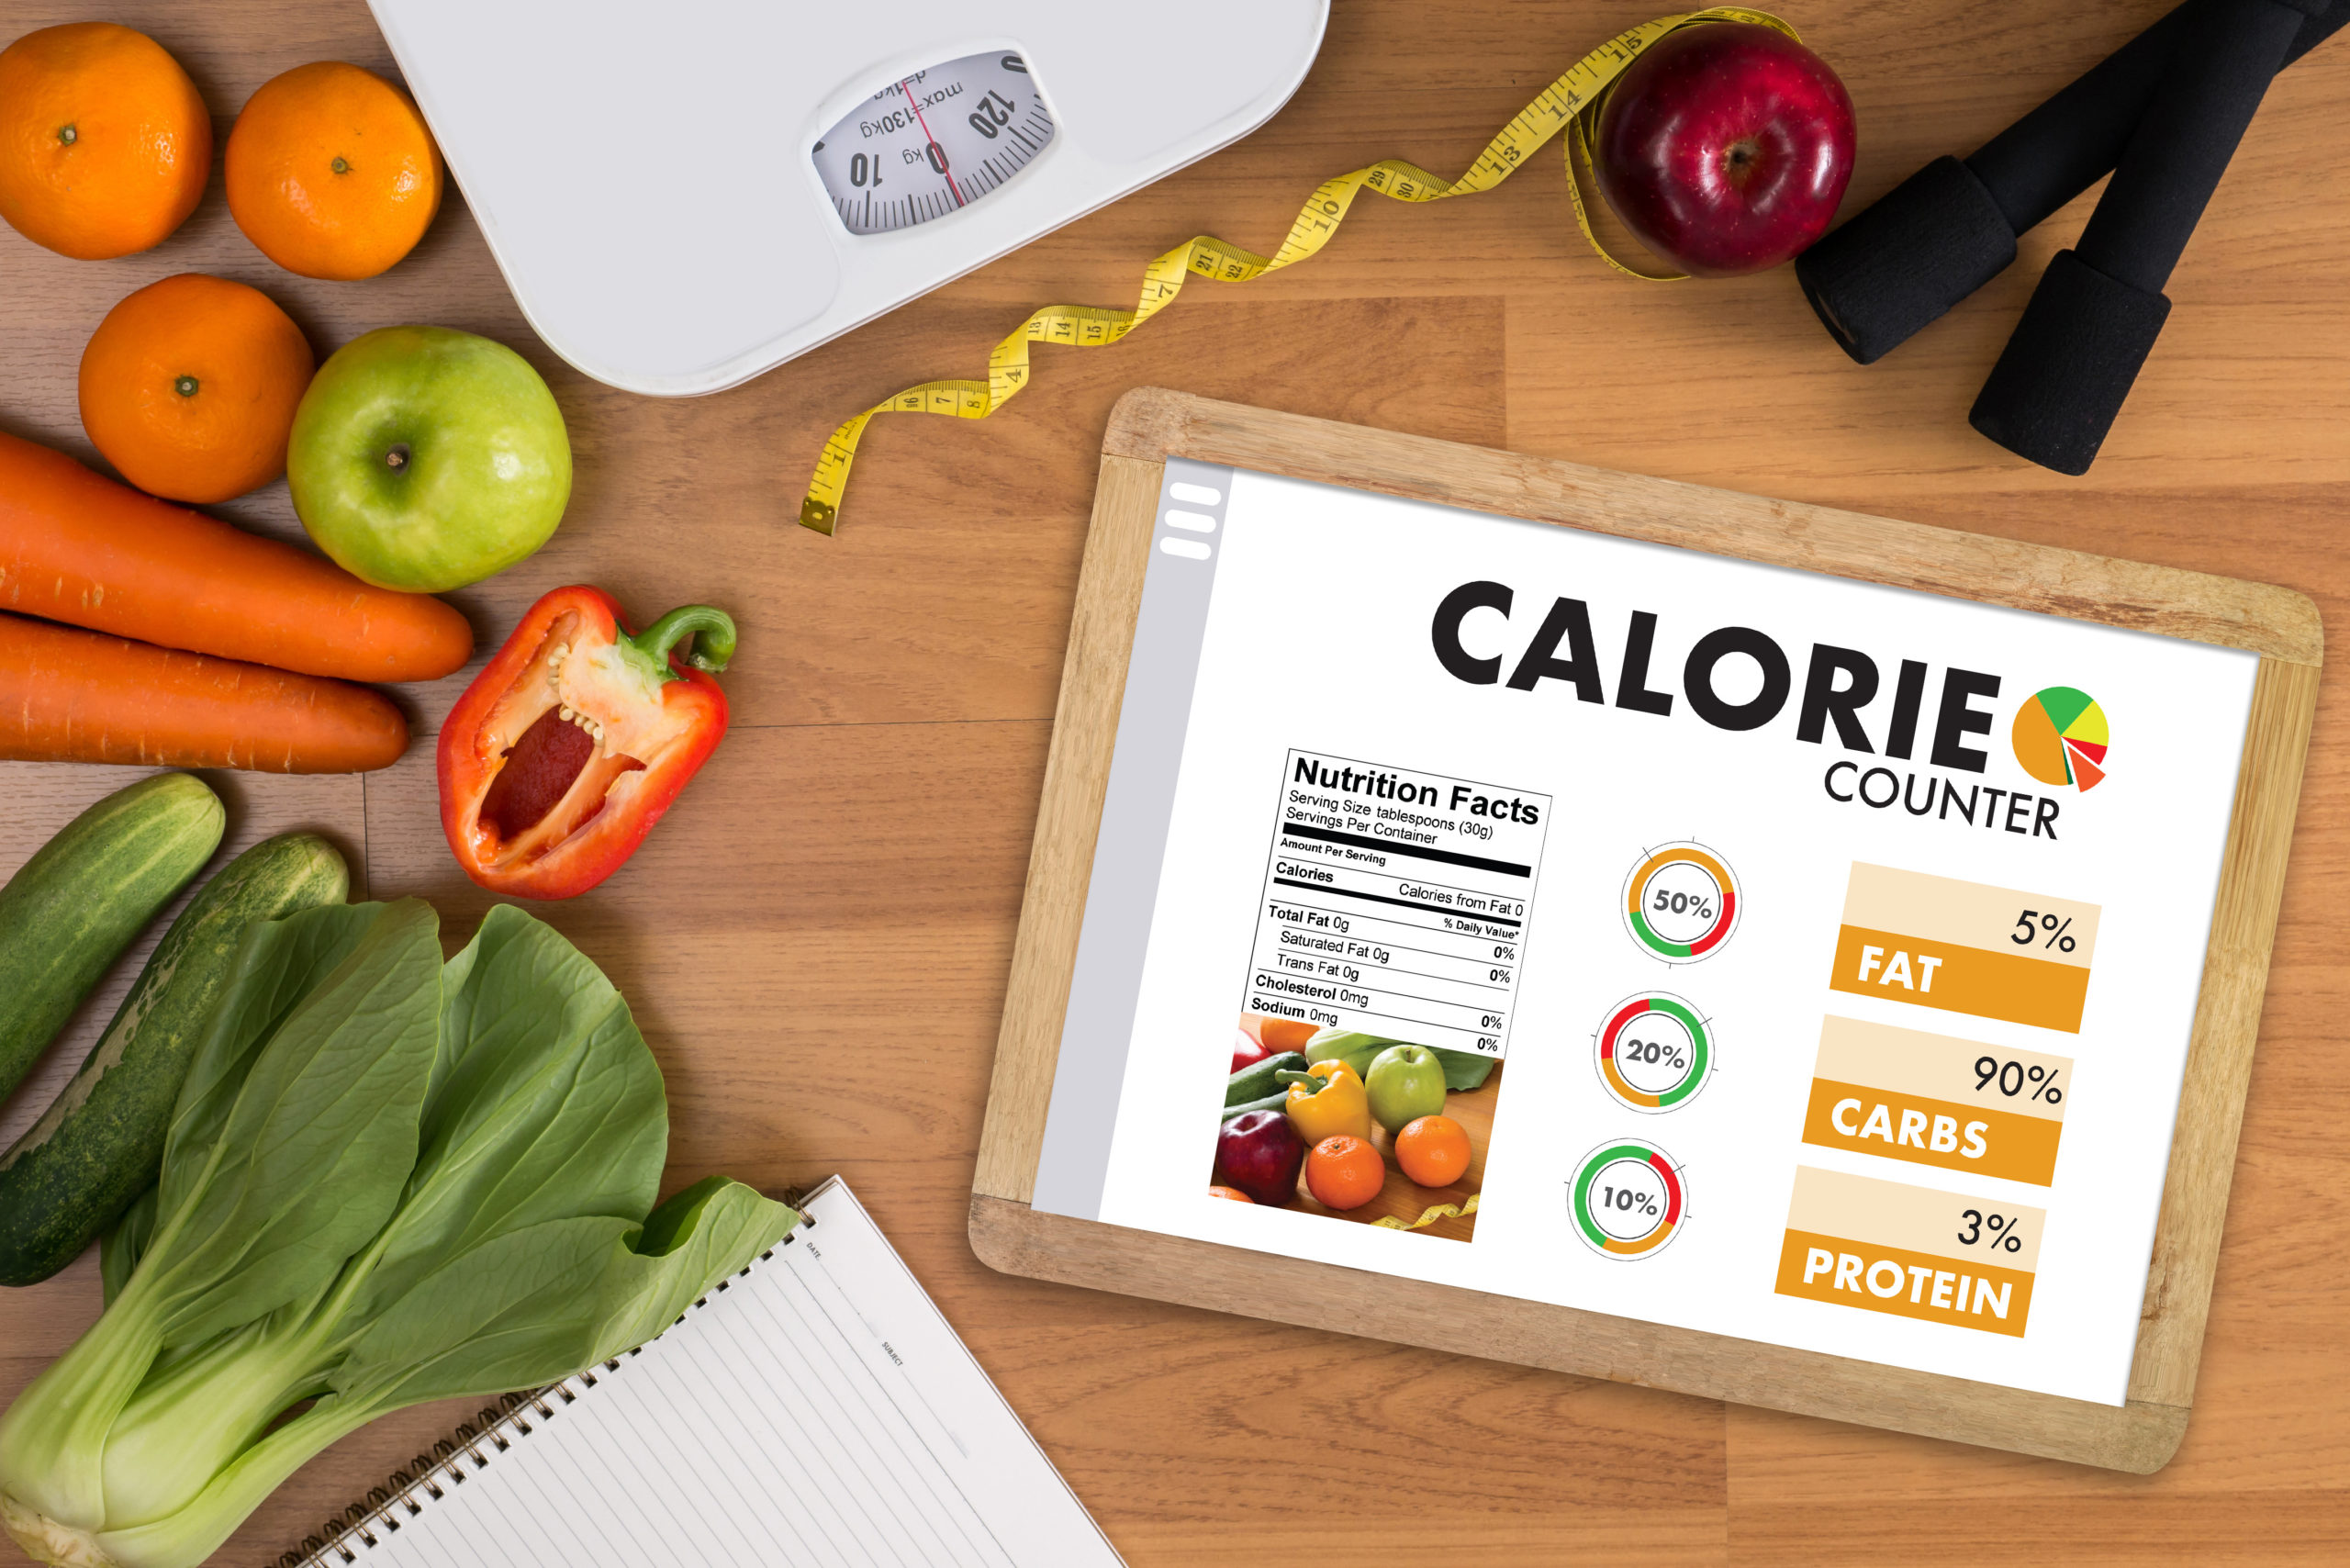 How Many Calories Should I Be Eating Daily?